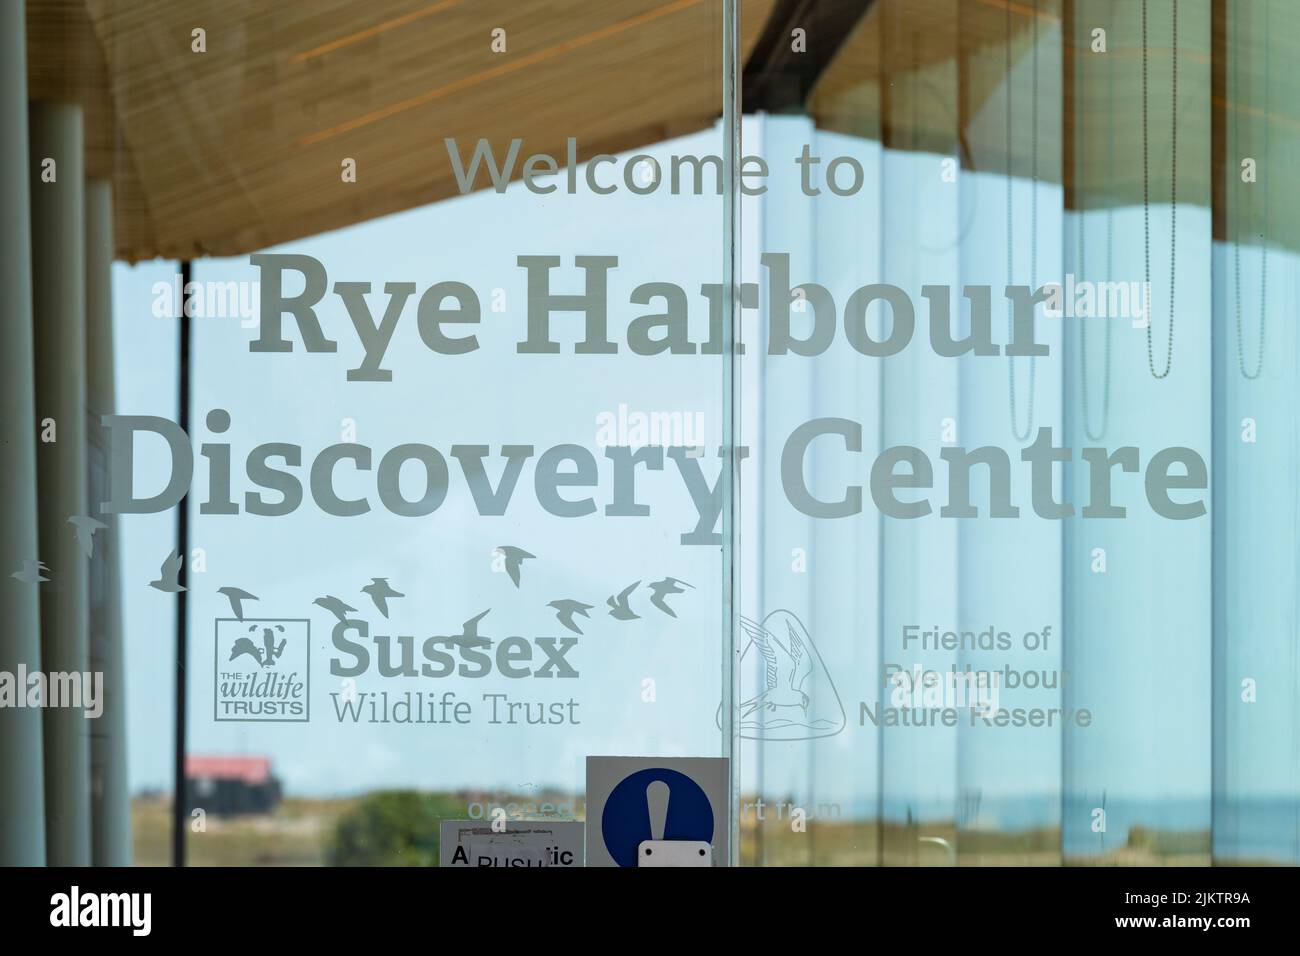 Rye Harbour Discovery Centre, Rye Harbour Nature Reserve, Rye Harbour, Rye, Inghilterra Foto Stock